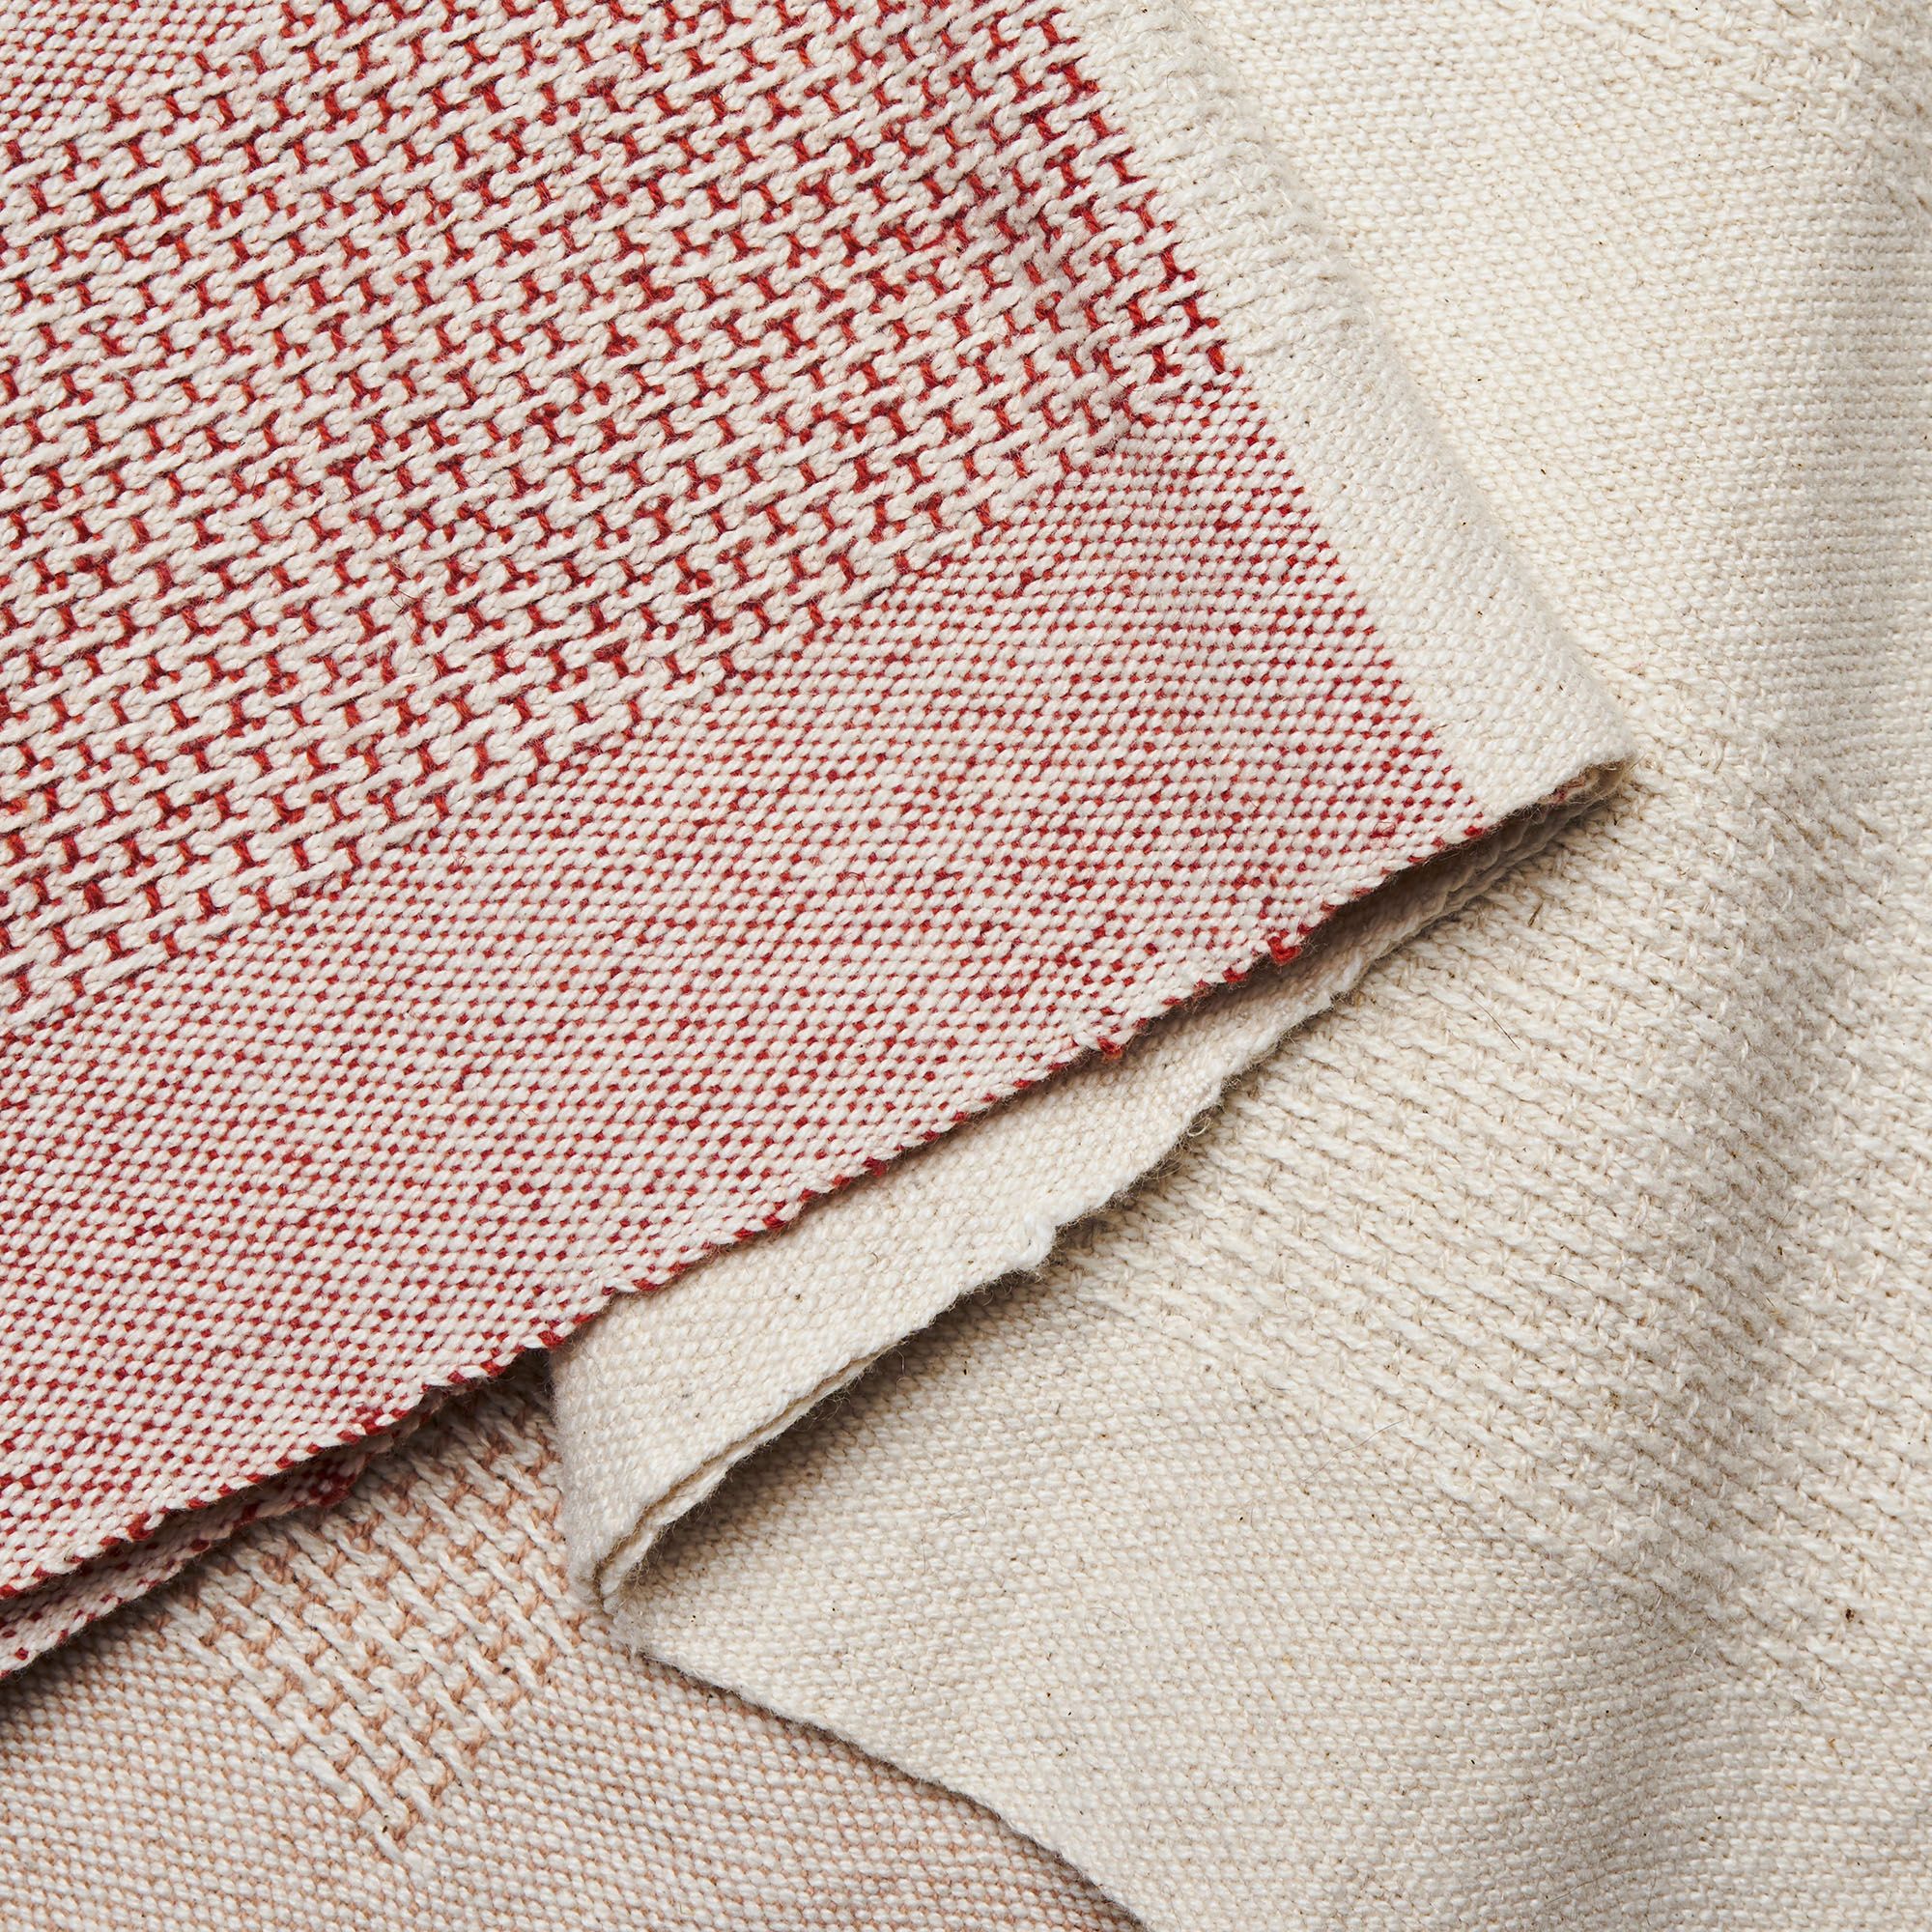 A close up shot of a part-earthy red, part-natural fiber tea towel, showing how the red and white fibers are woven together